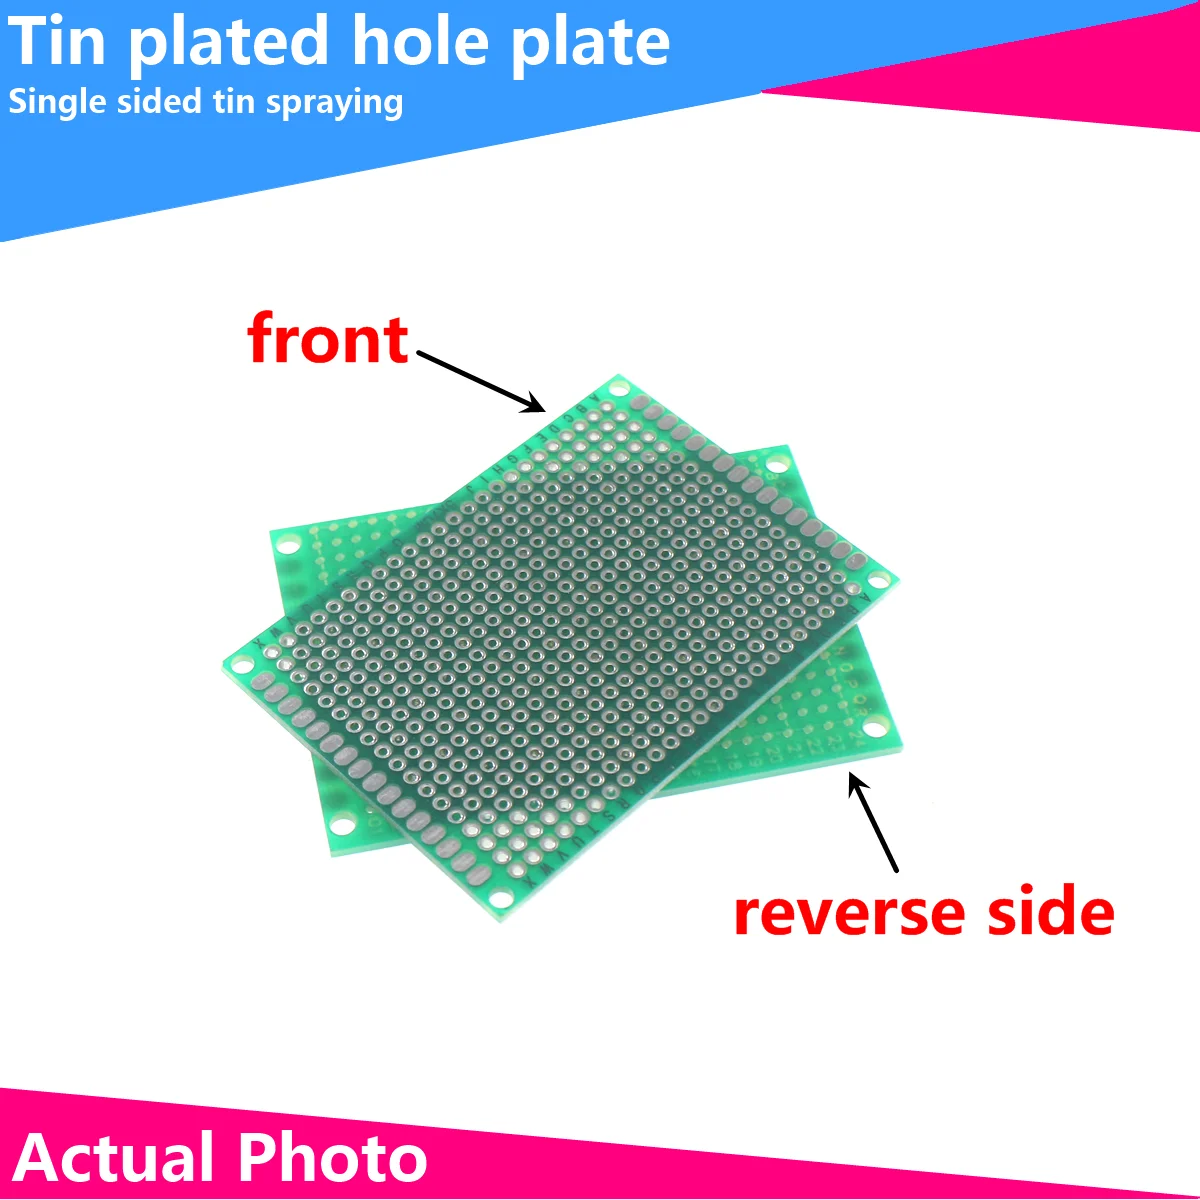 2/5/10PCS 2*8 3*7 9*15 12*18 20*30 single side tin plated universal board 12X18CM thickness 1.5 glass fiber board spray tin plat fr4 double side copper clad plate 12x18cm diy printed circuit pcb kit laminate circuit board 12x18cm glass fiber universal board